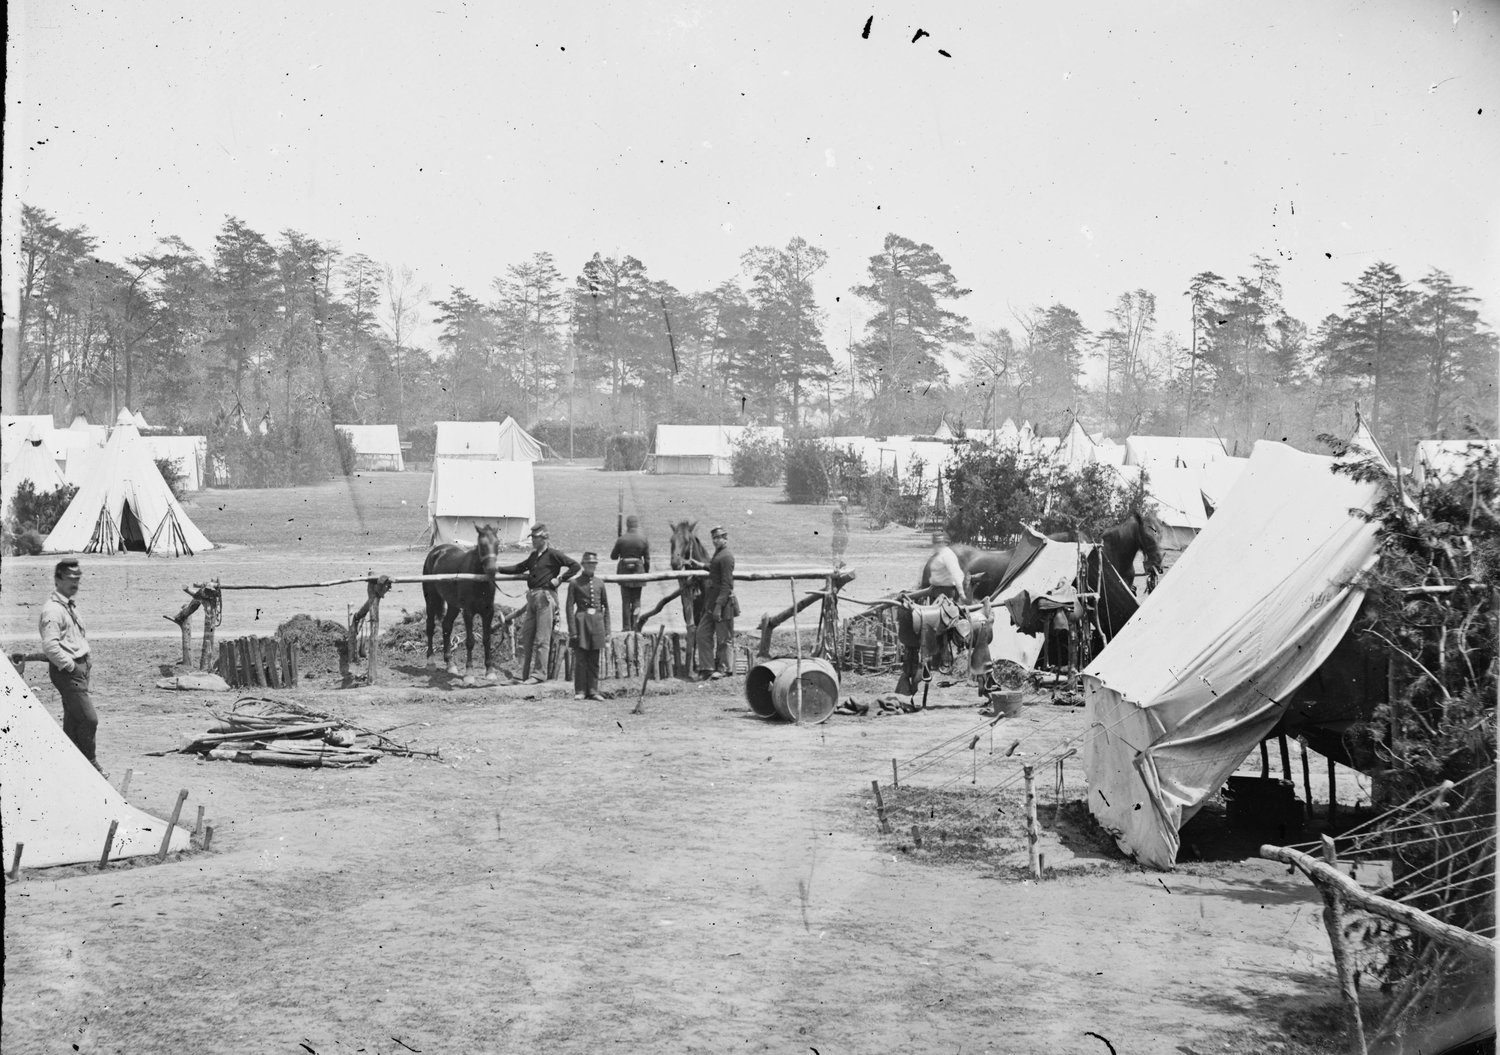 Camp Winfield Scott, one of the camps Albert wrote from.